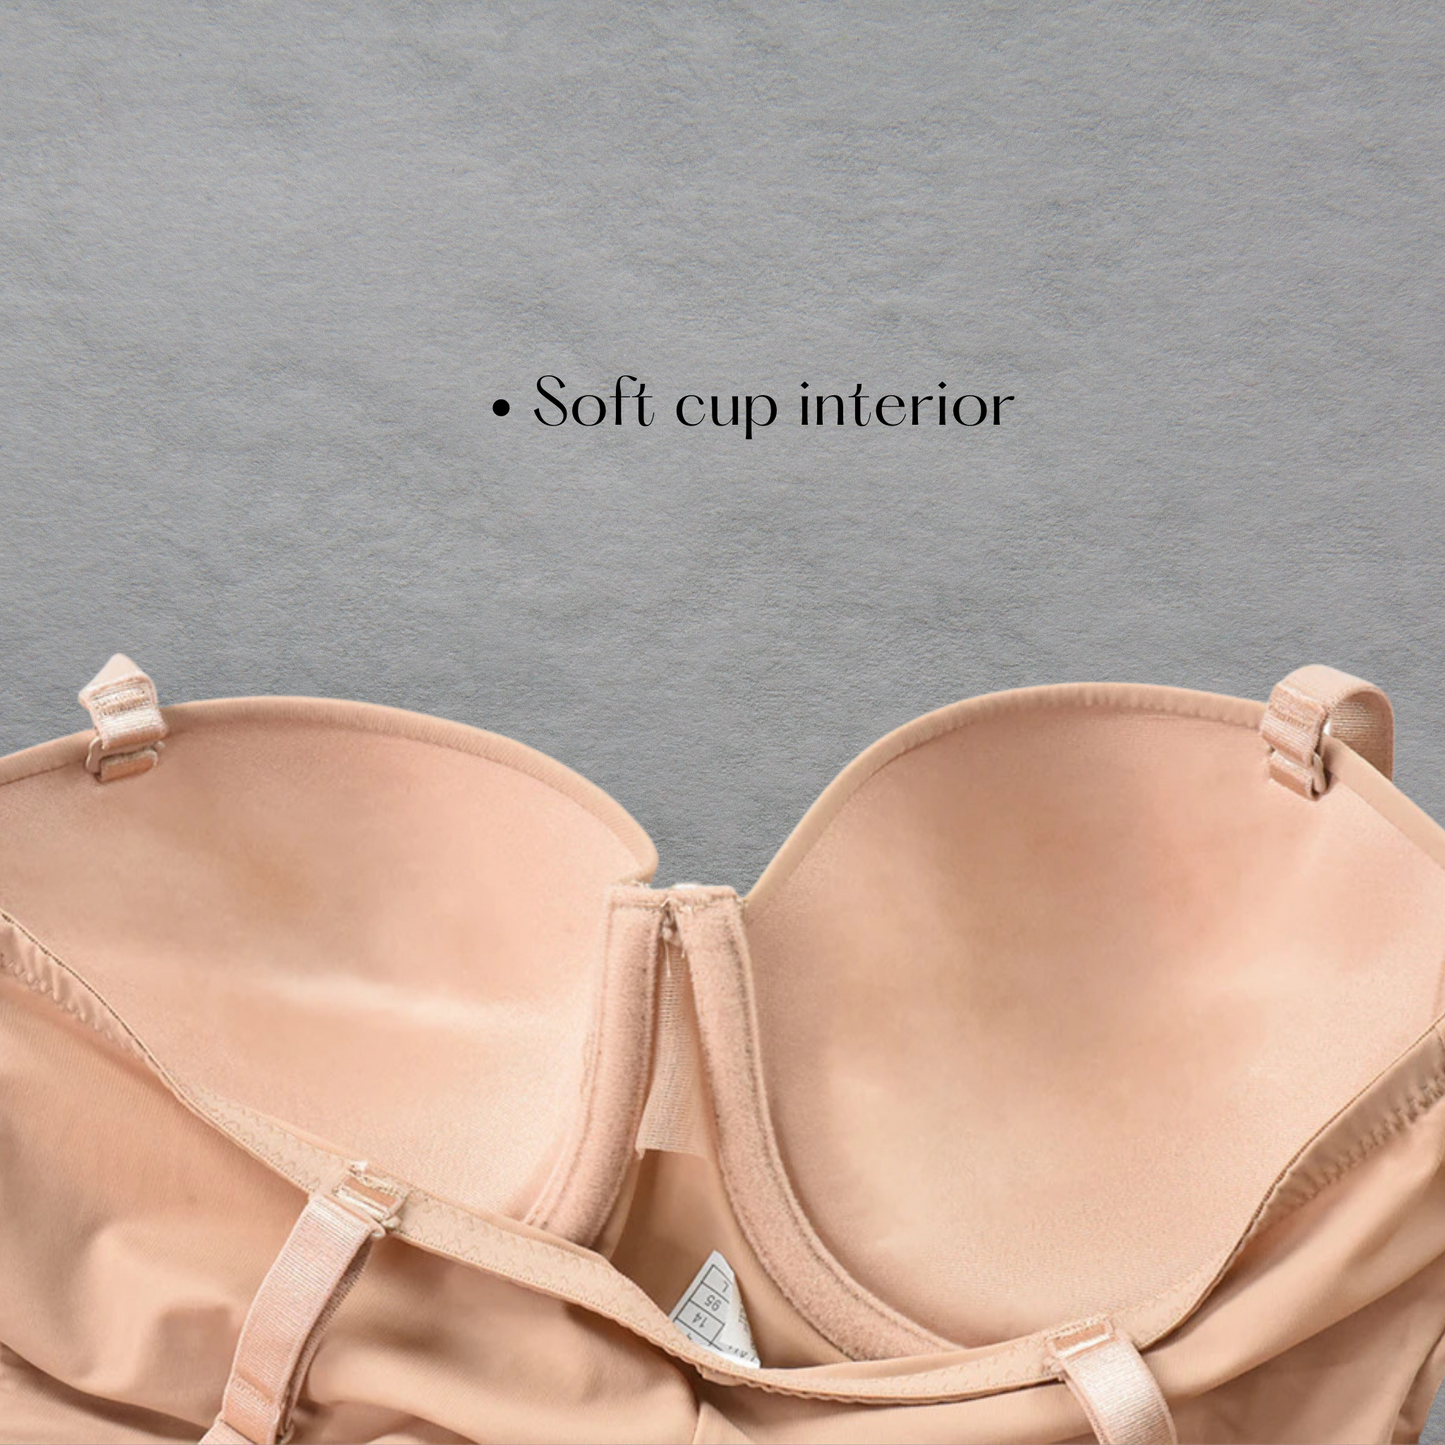 close up product shot of the interior bra cup of the shapewear slip dress